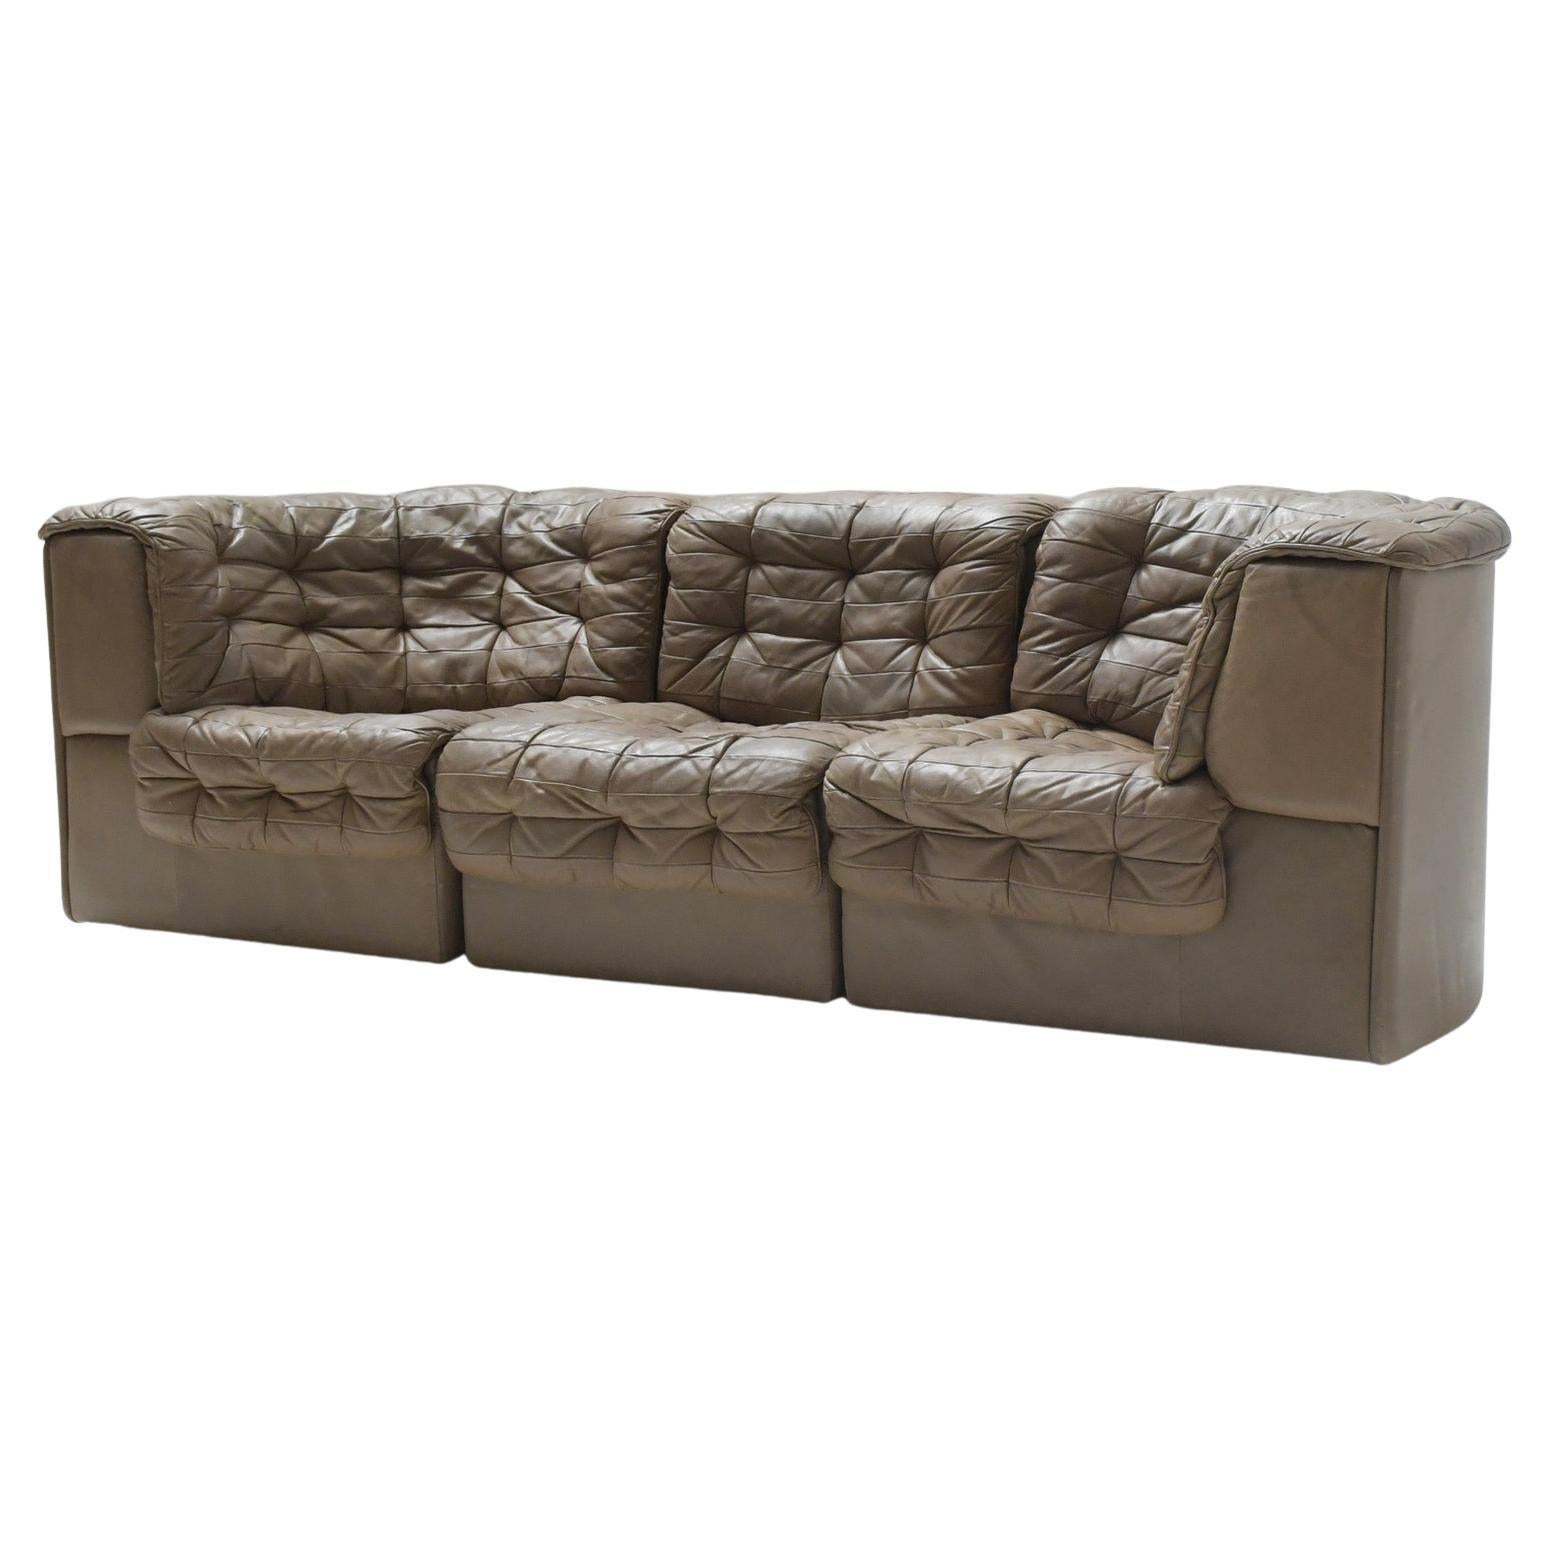 Ds 11 Modular Sofa in Brown Patchwork Leather by De Sede Team for De Sede Swiss